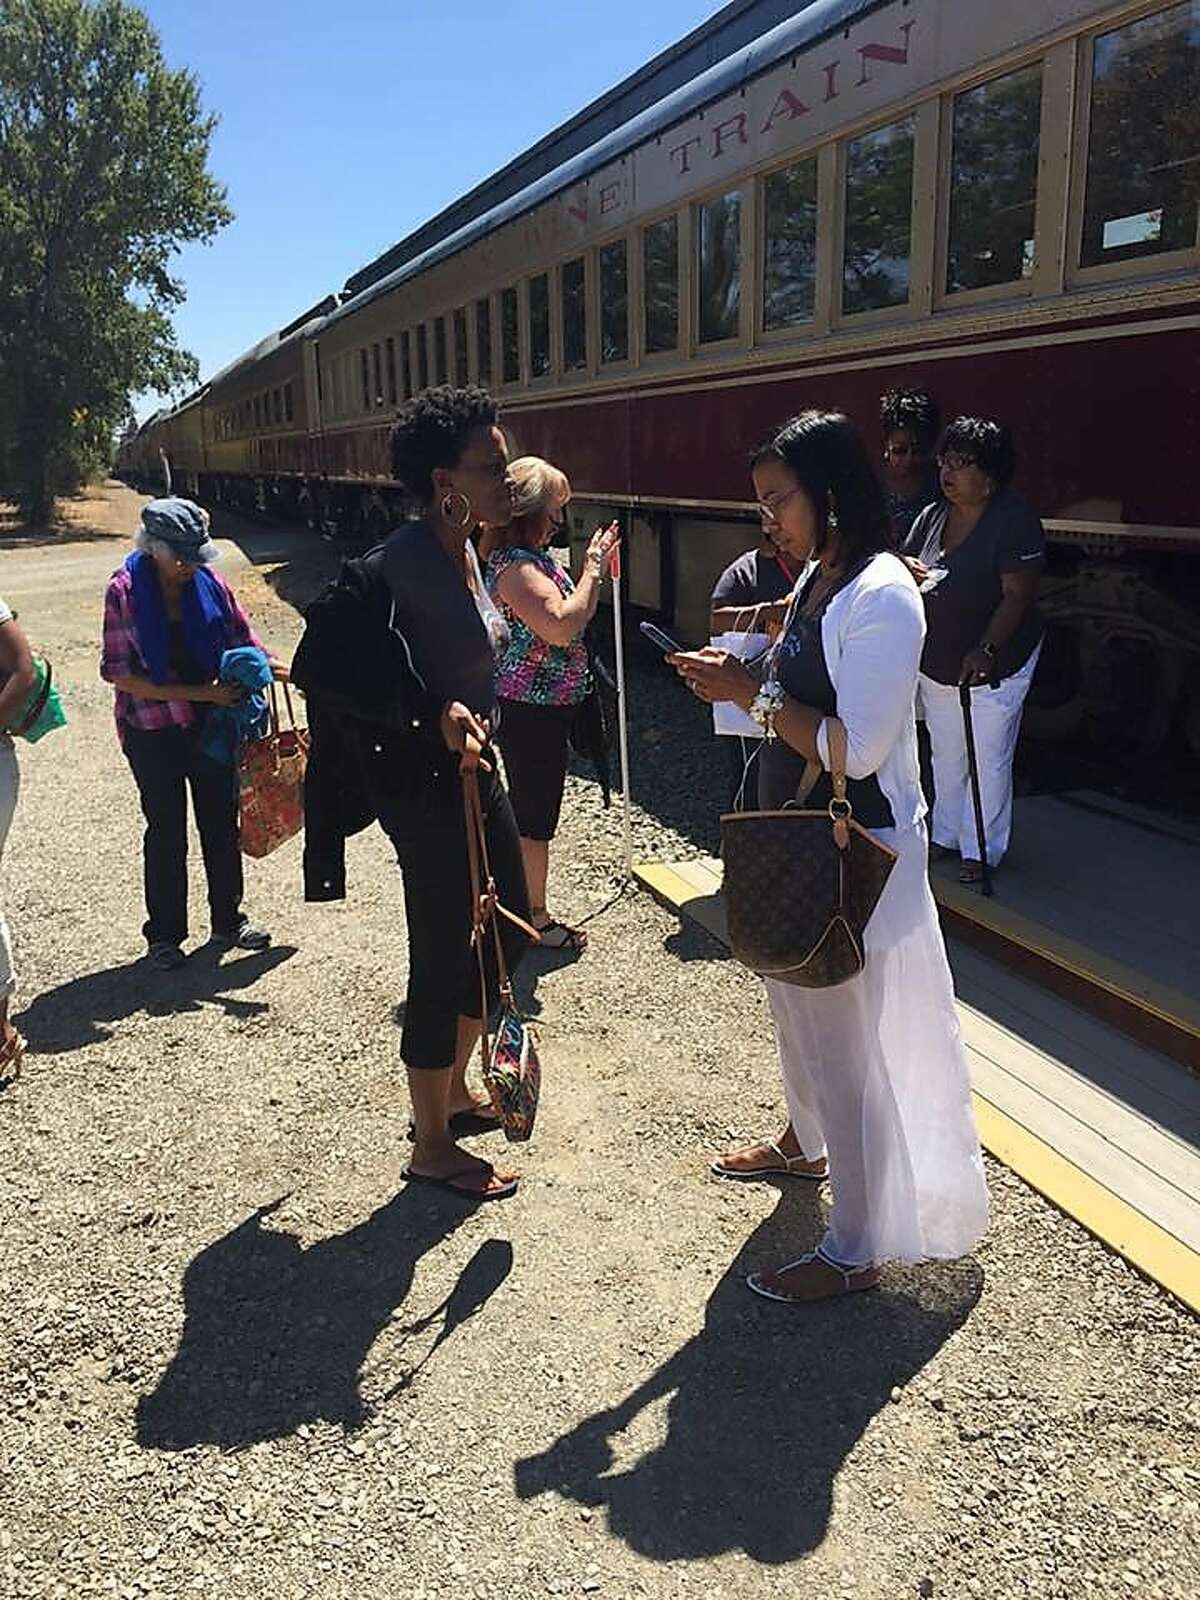 A group of African American women who are part of a book club were kicked off the Napa Valley Wine Train on Saturday, Aug. 22, 2015.